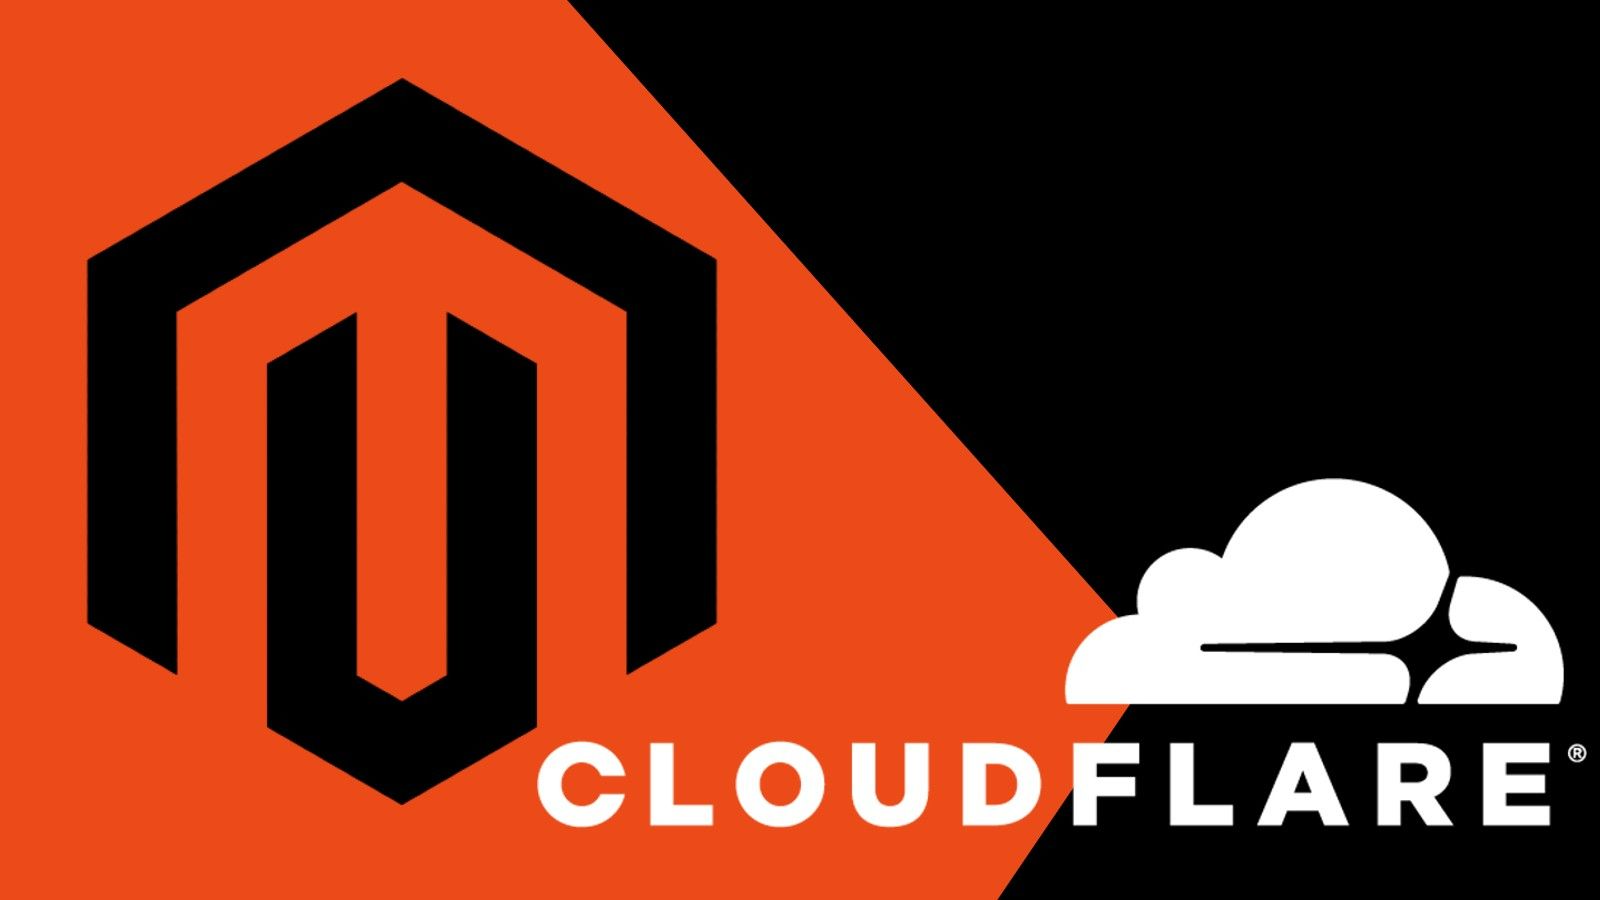 Let’s look at how to set up a Magento Content Delivery Network (CDN) with Cloudflare.